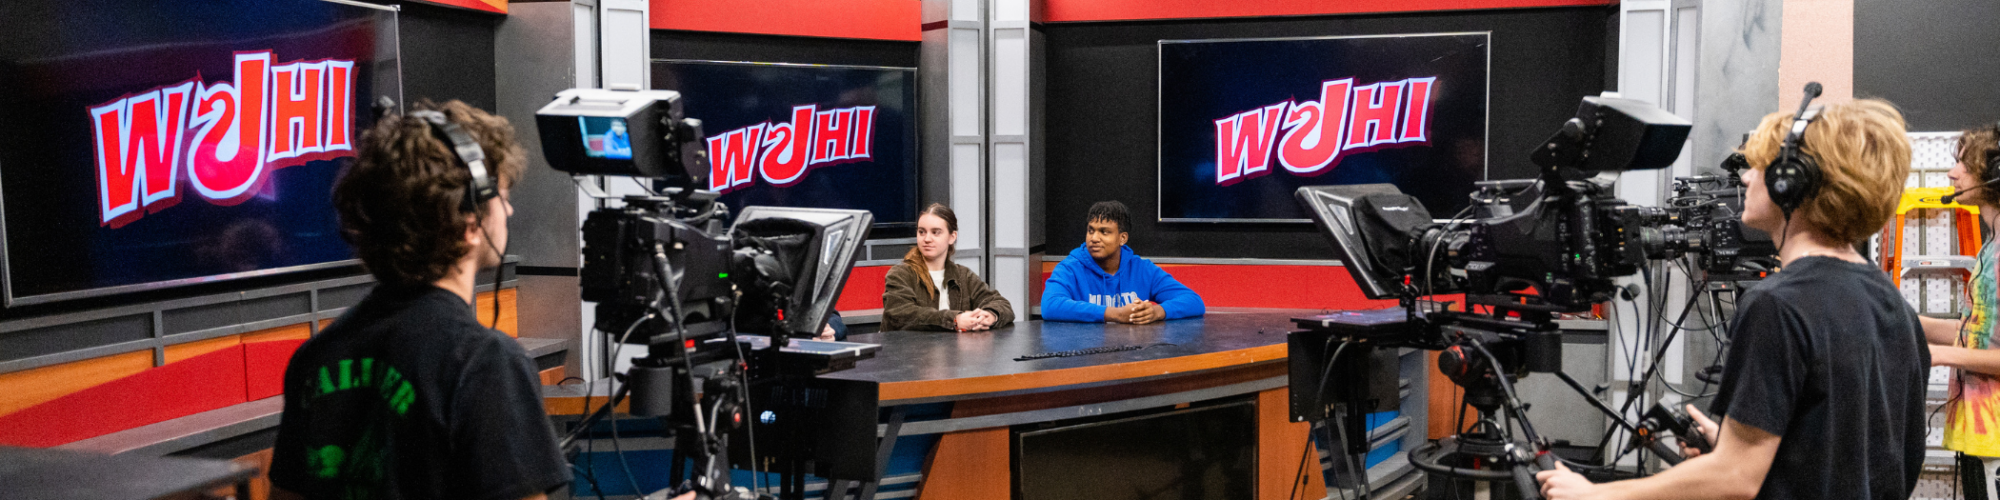 WJHI students filming